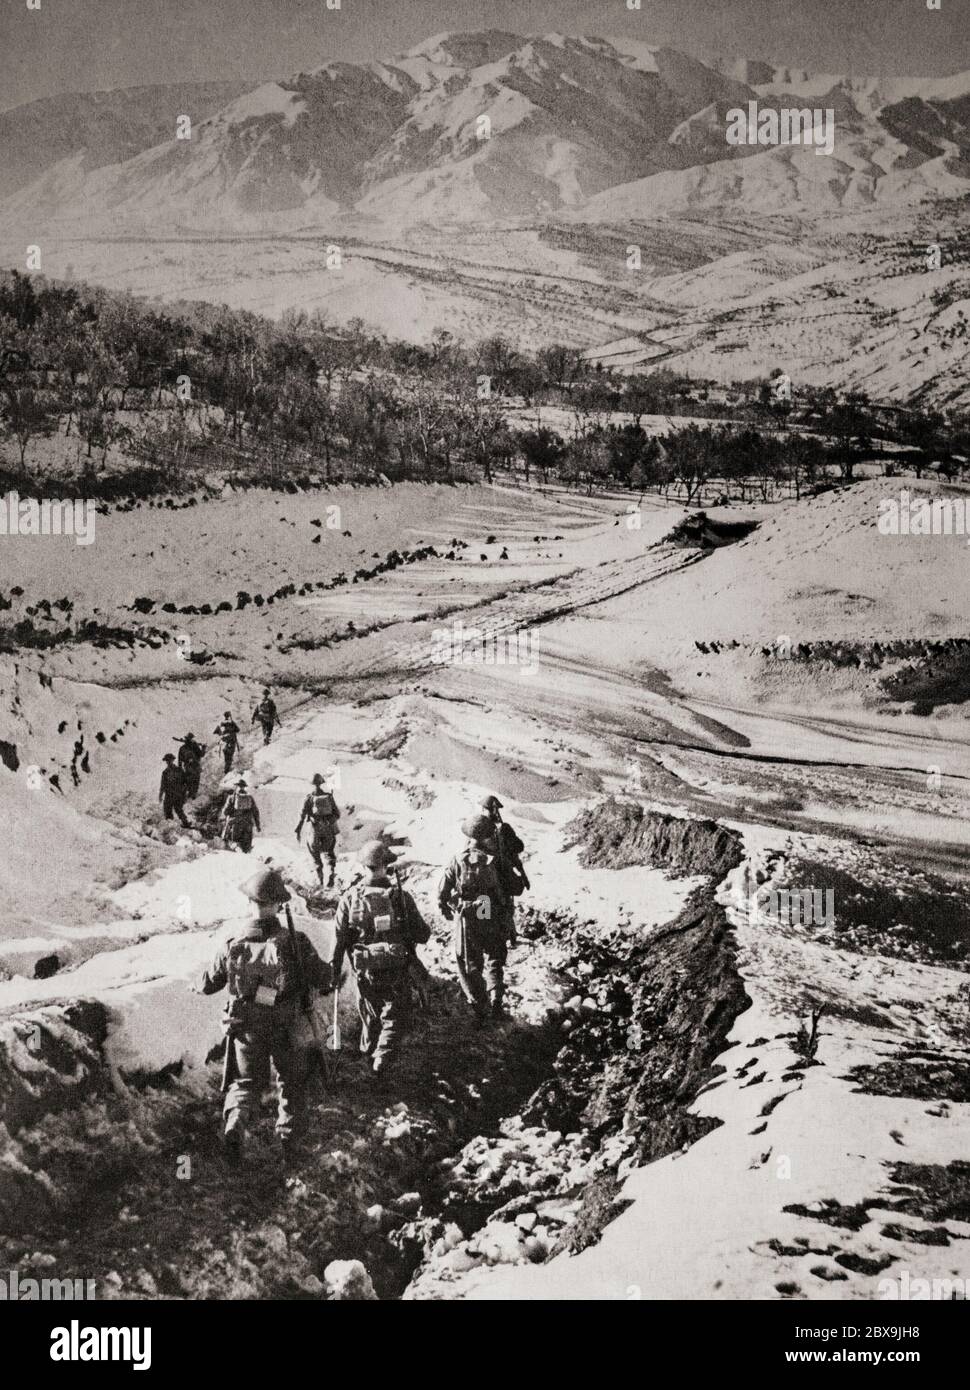 British soldiers advancing across snow-covered mountains after the Anzio landings. The Battle of Anzio was part of the Winter Line and the battle for Rome of the Italian Campaign of World War II that took place from January 22, 1944 to June 5, 1944 (ending with the capture of Rome). The operation was opposed by German forces in the area of Anzio and Nettuno. Stock Photo